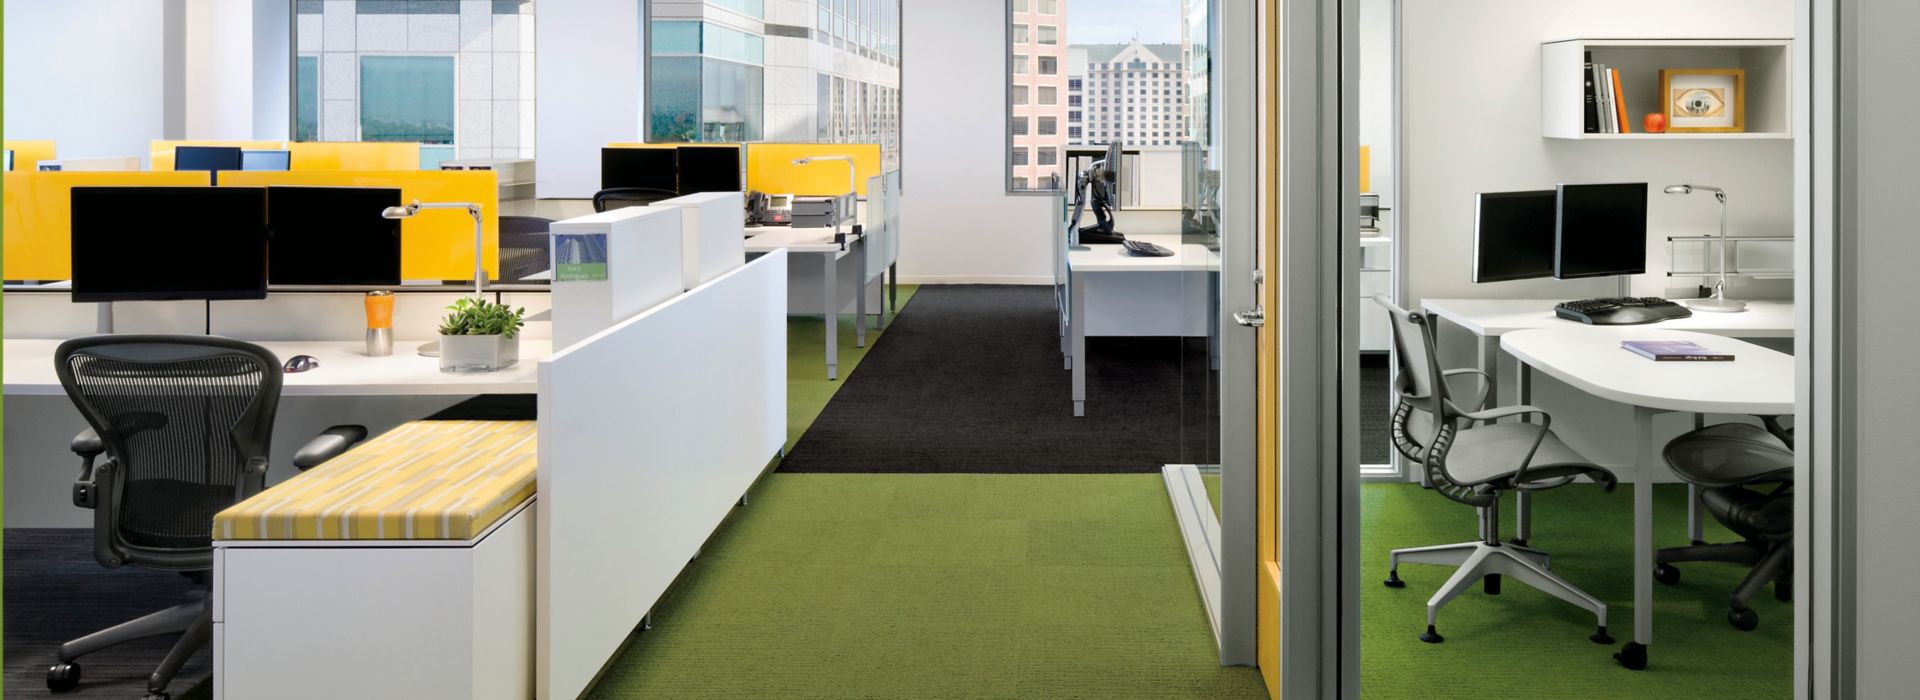 image Interface Monochrome and Striation carpet tile in walkway of office with multiple open offices and a private office numéro 1